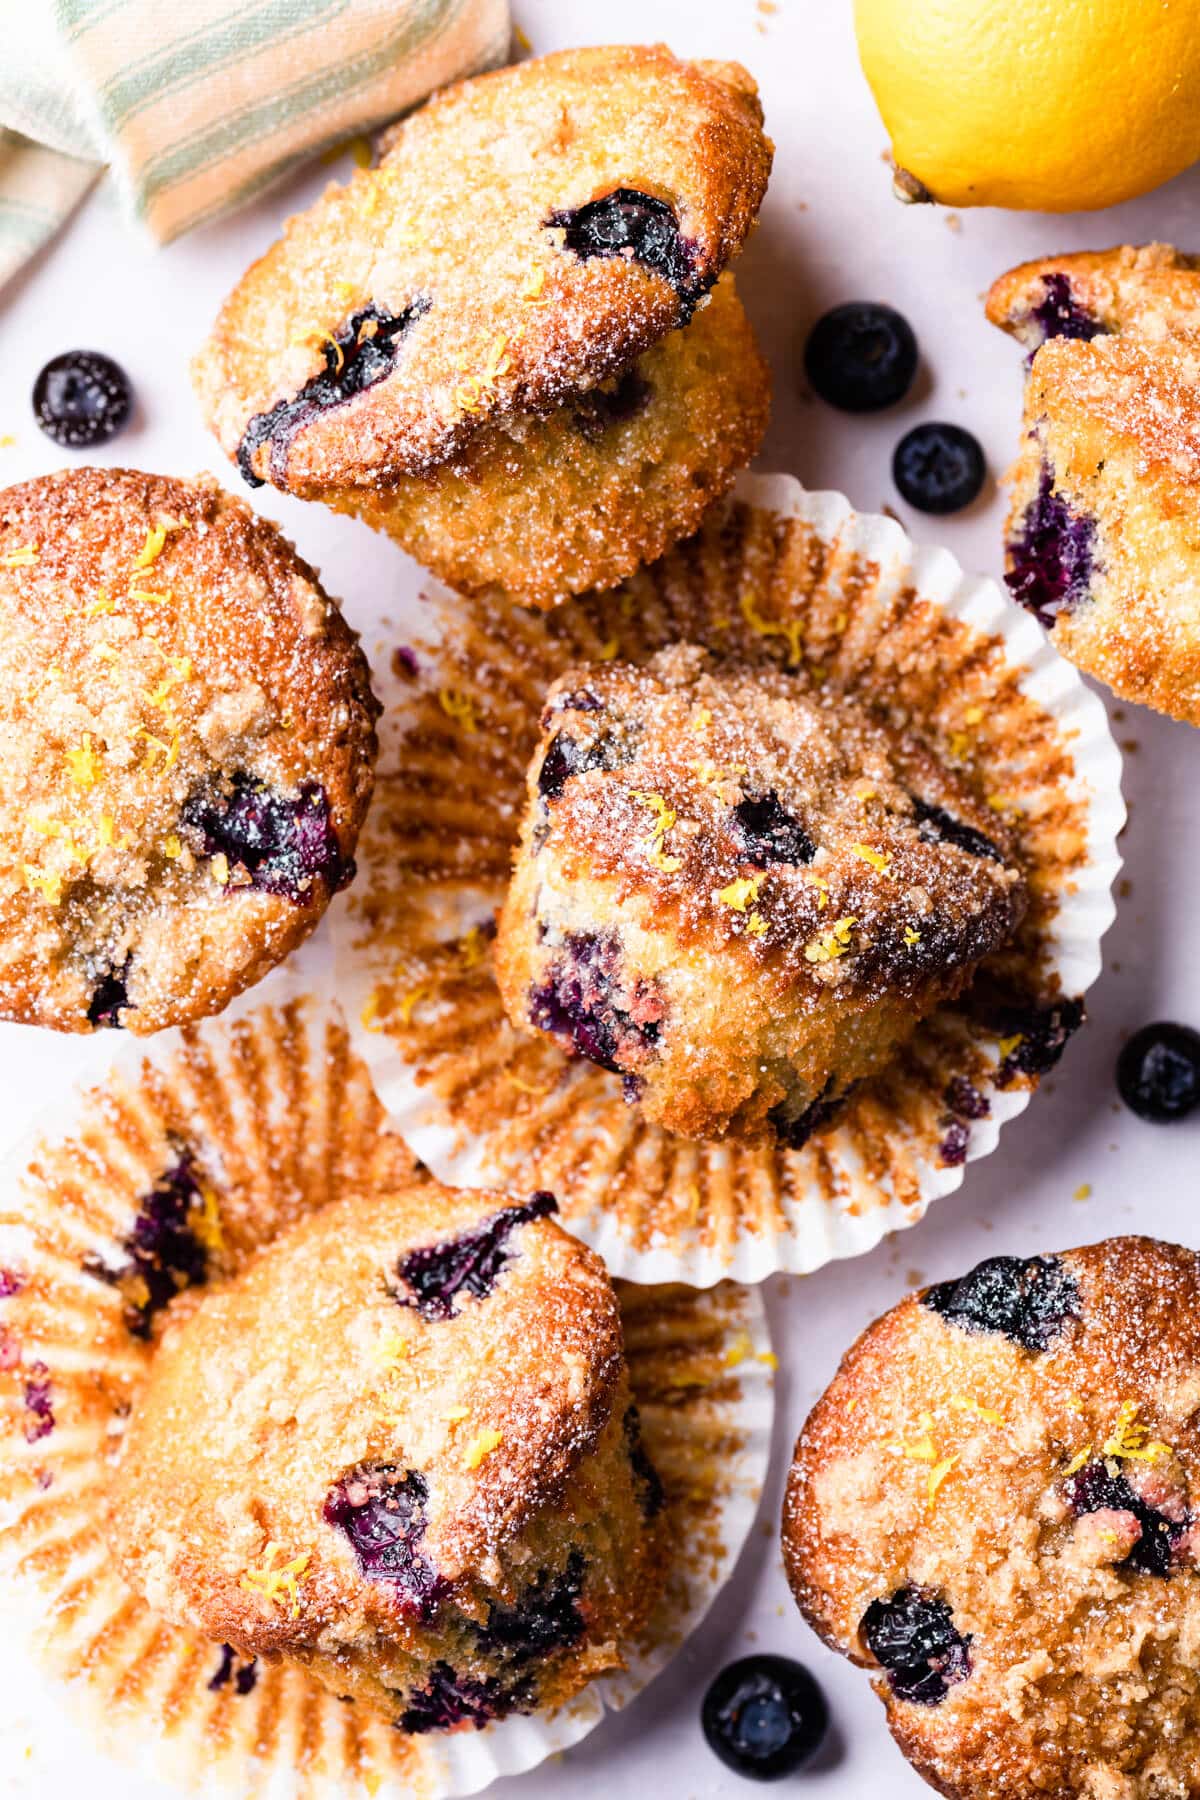 blueberry and lemon muffins dusted with icing sugar on a bright background.